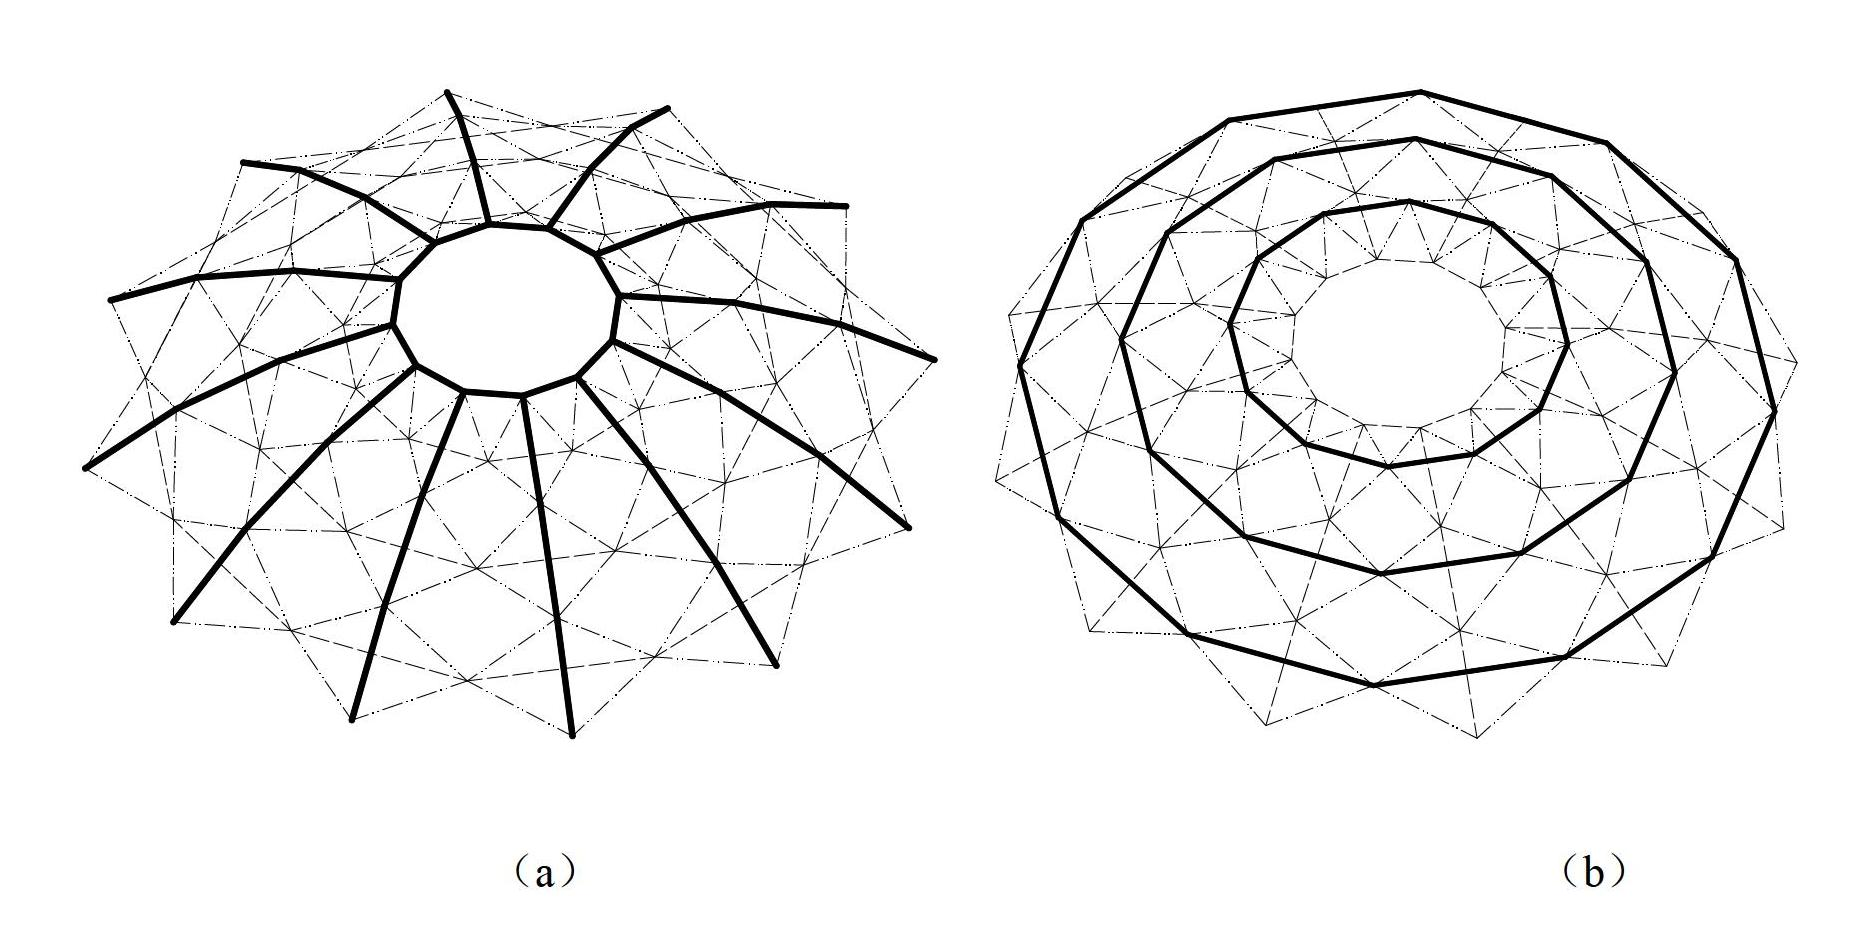 Spherical reticulated shell composed of connected quadrilateral-planed six-rod tetrahedron units